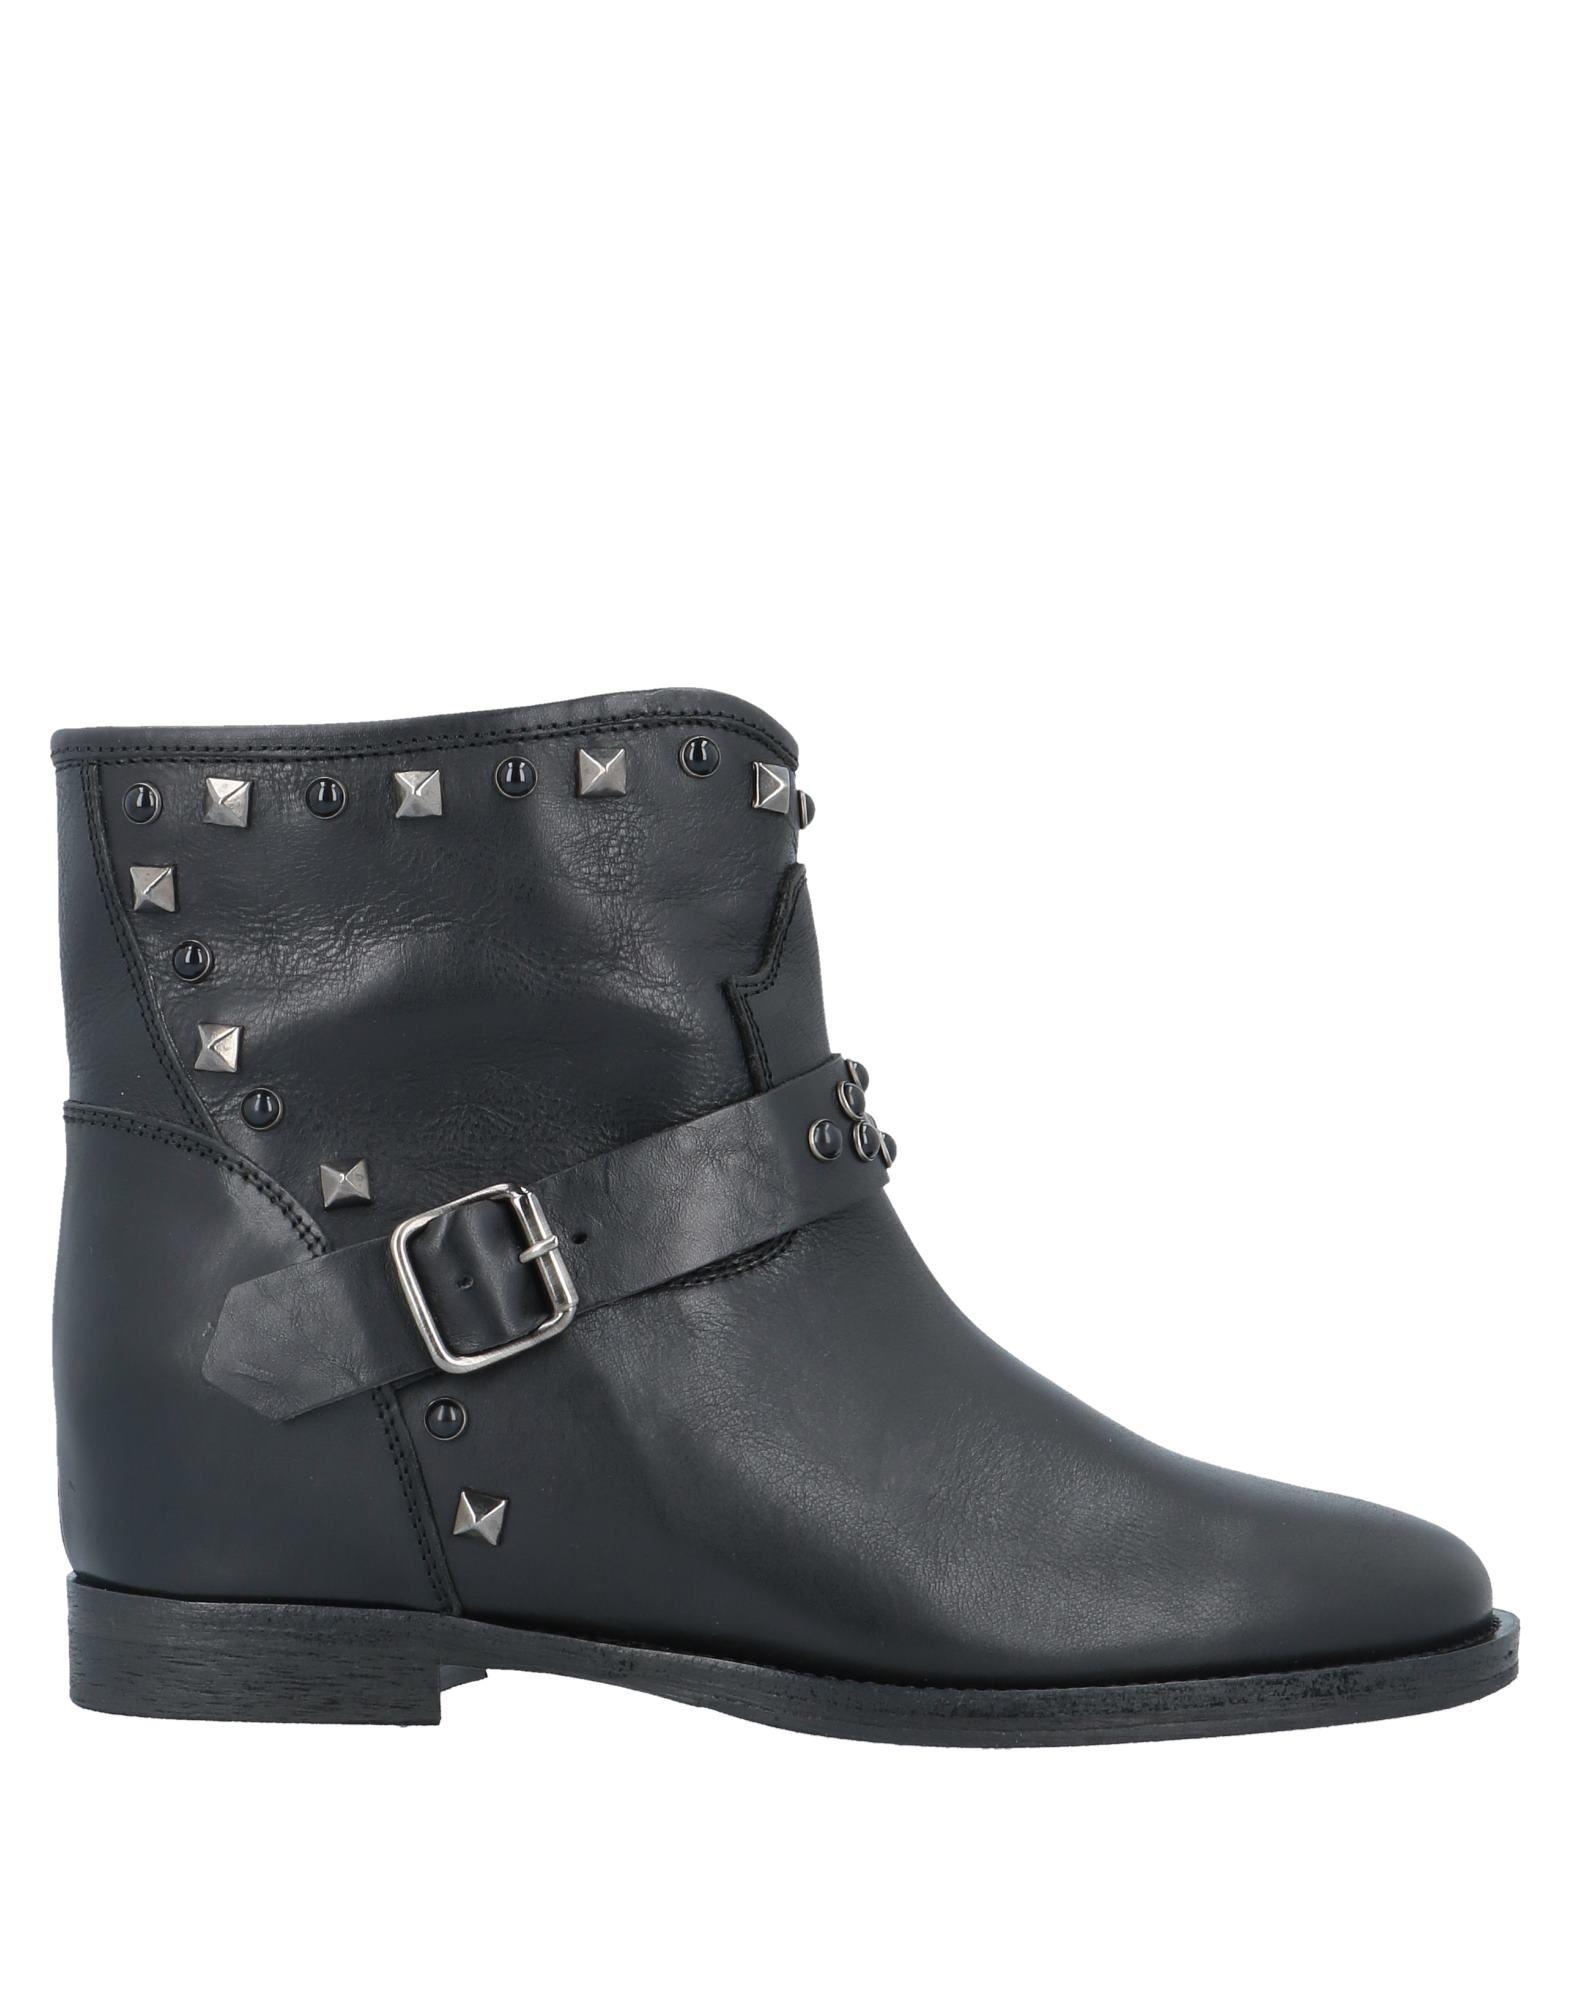 Via Roma 15 Leather Ankle Boots in Black - Lyst